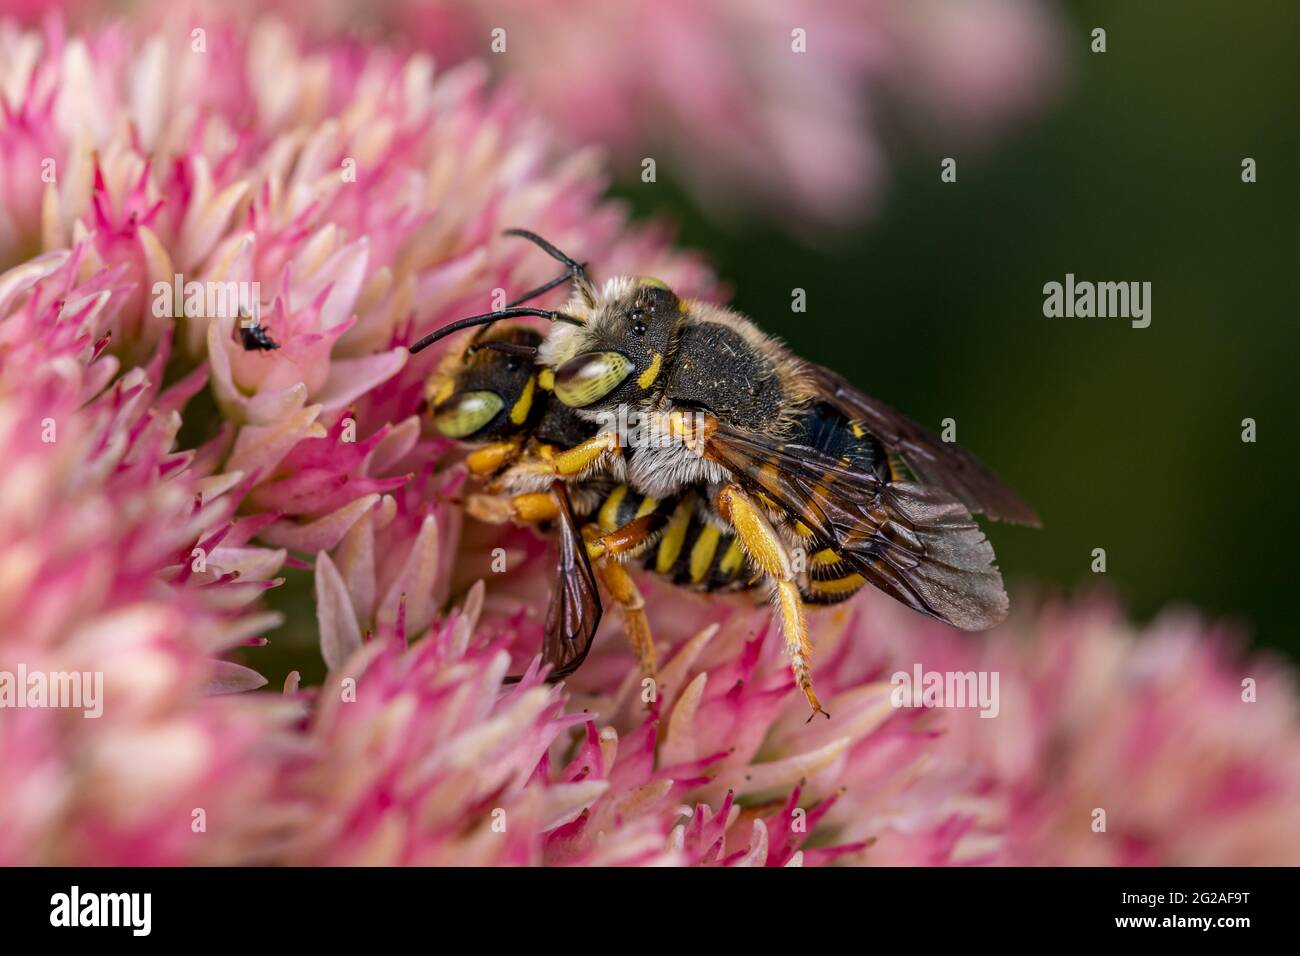 Wool-Carder bee feeding on nectar from Sedum plant. Concept of insect and wildlife conservation, habitat preservation, and backyard flower garden Stock Photo